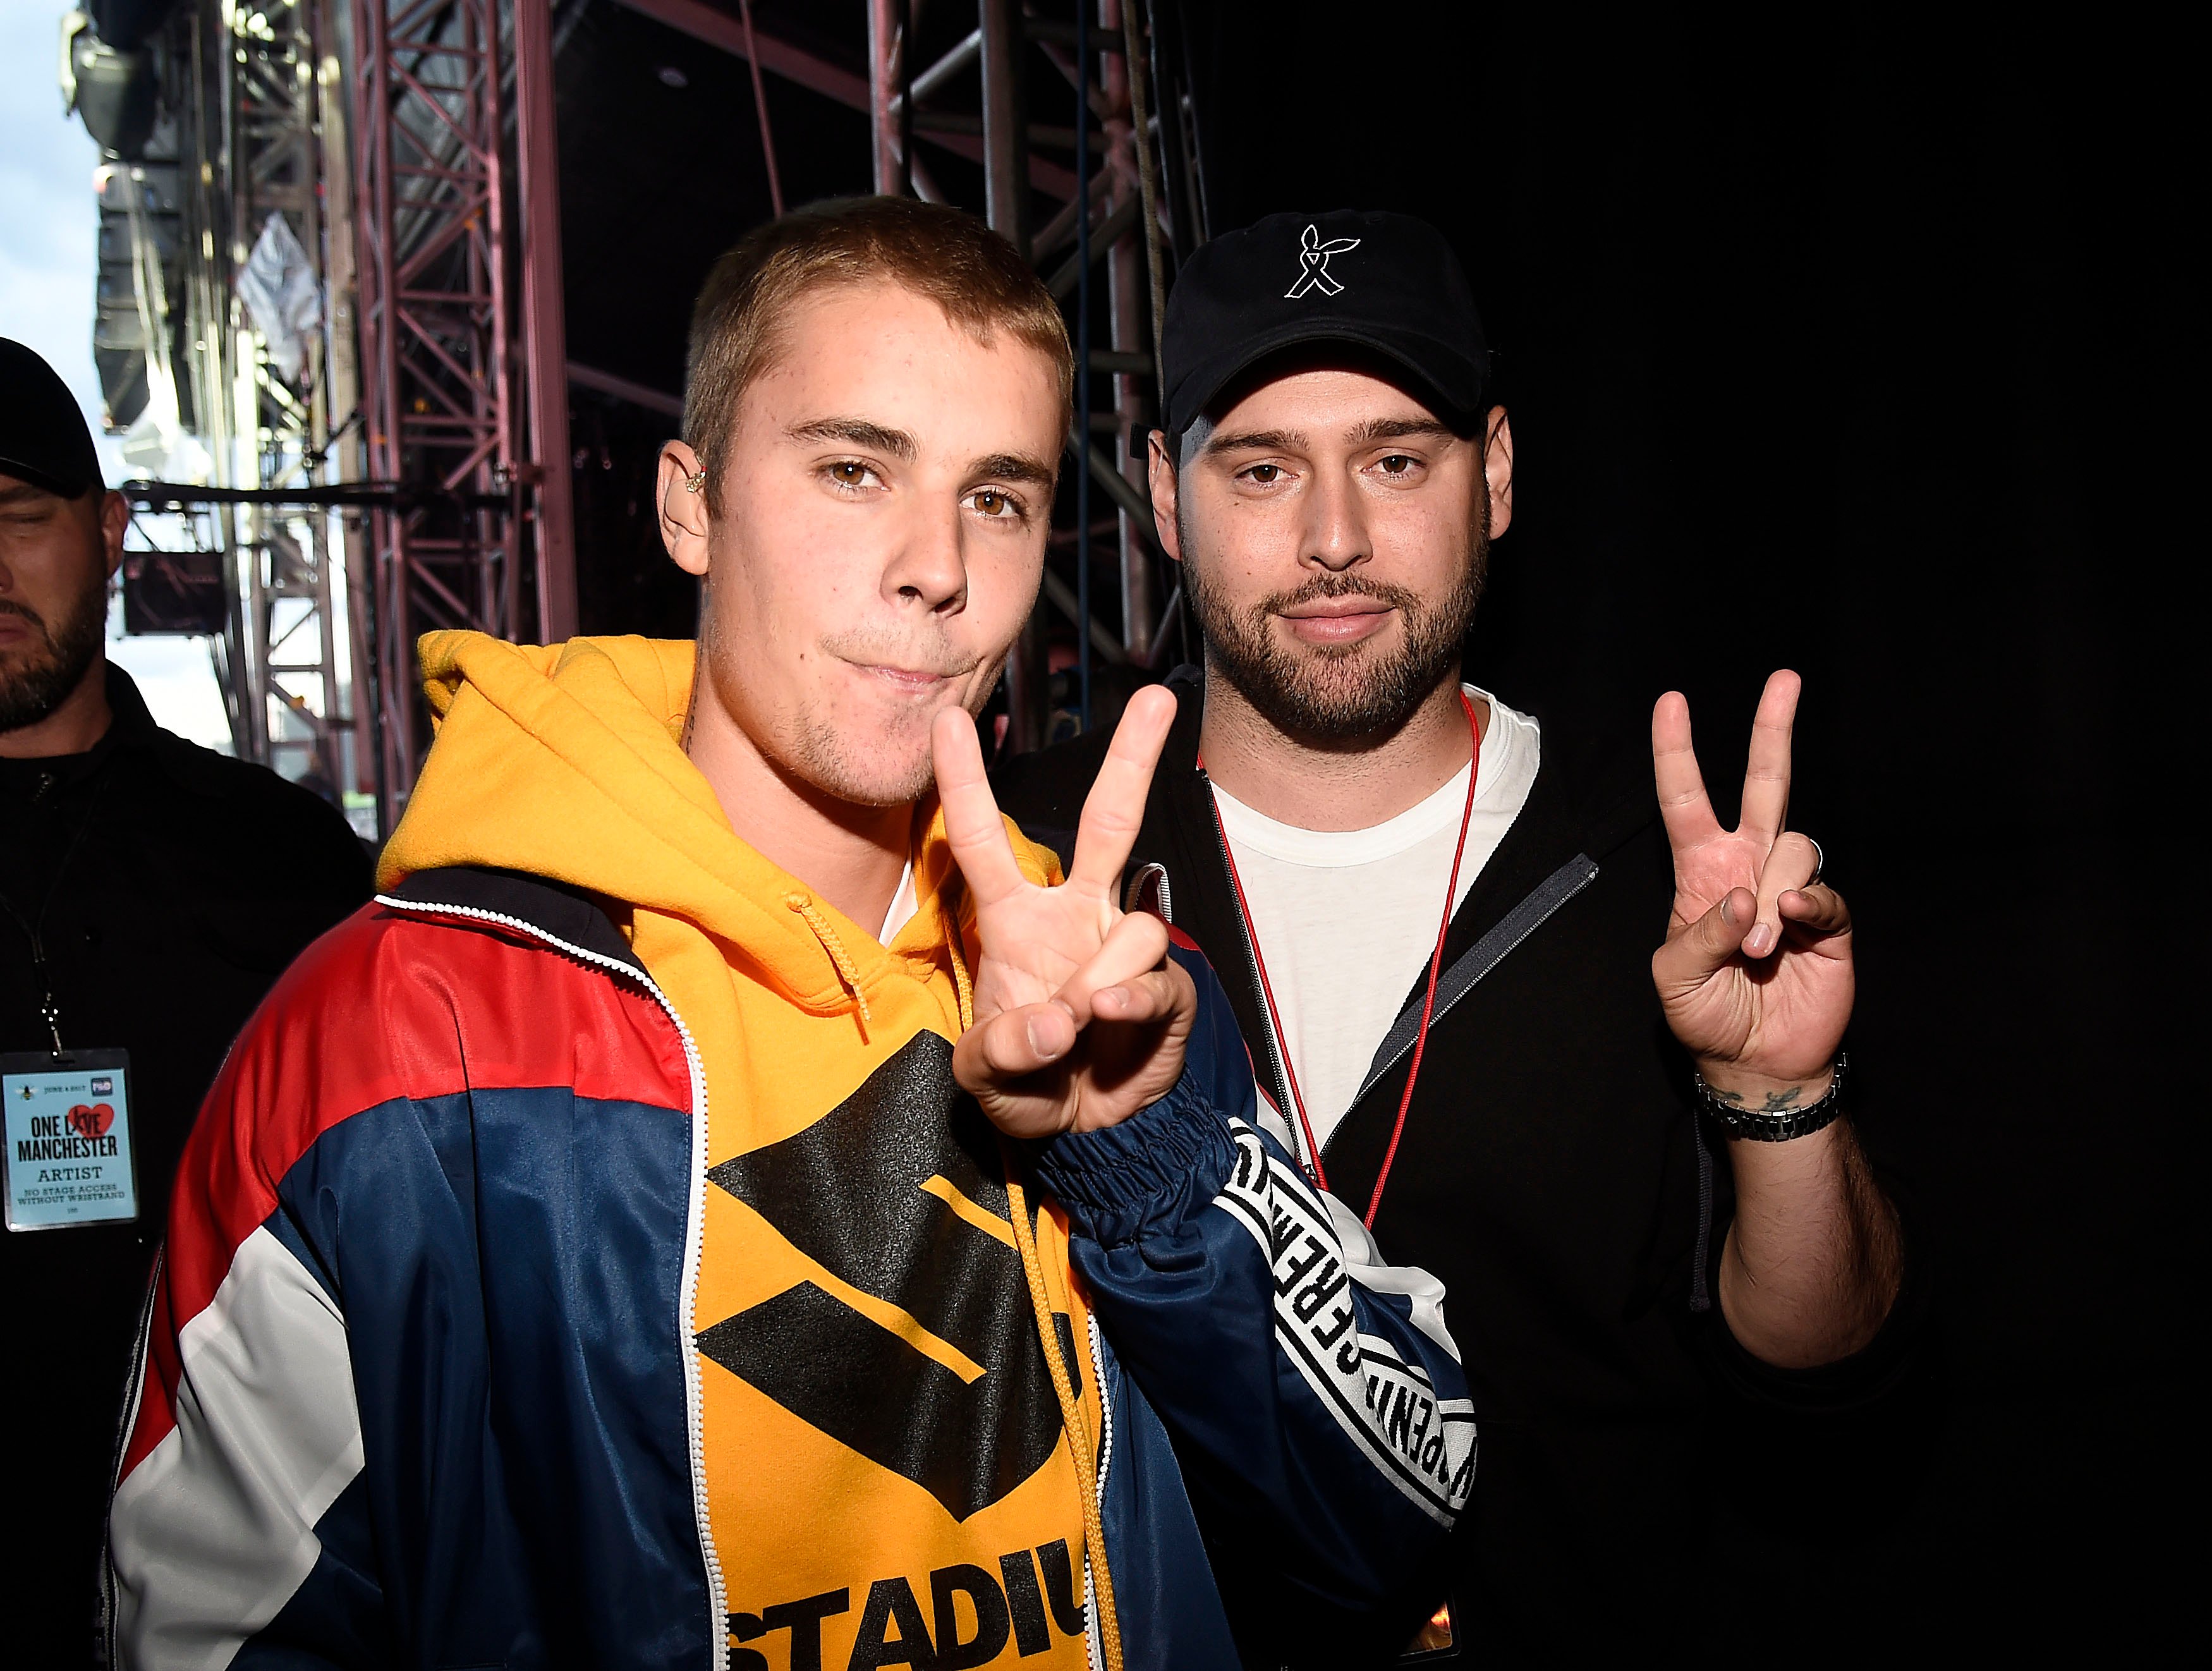 Justin Bieber and Scooter Braun doing a peace sign backstage at a concert.